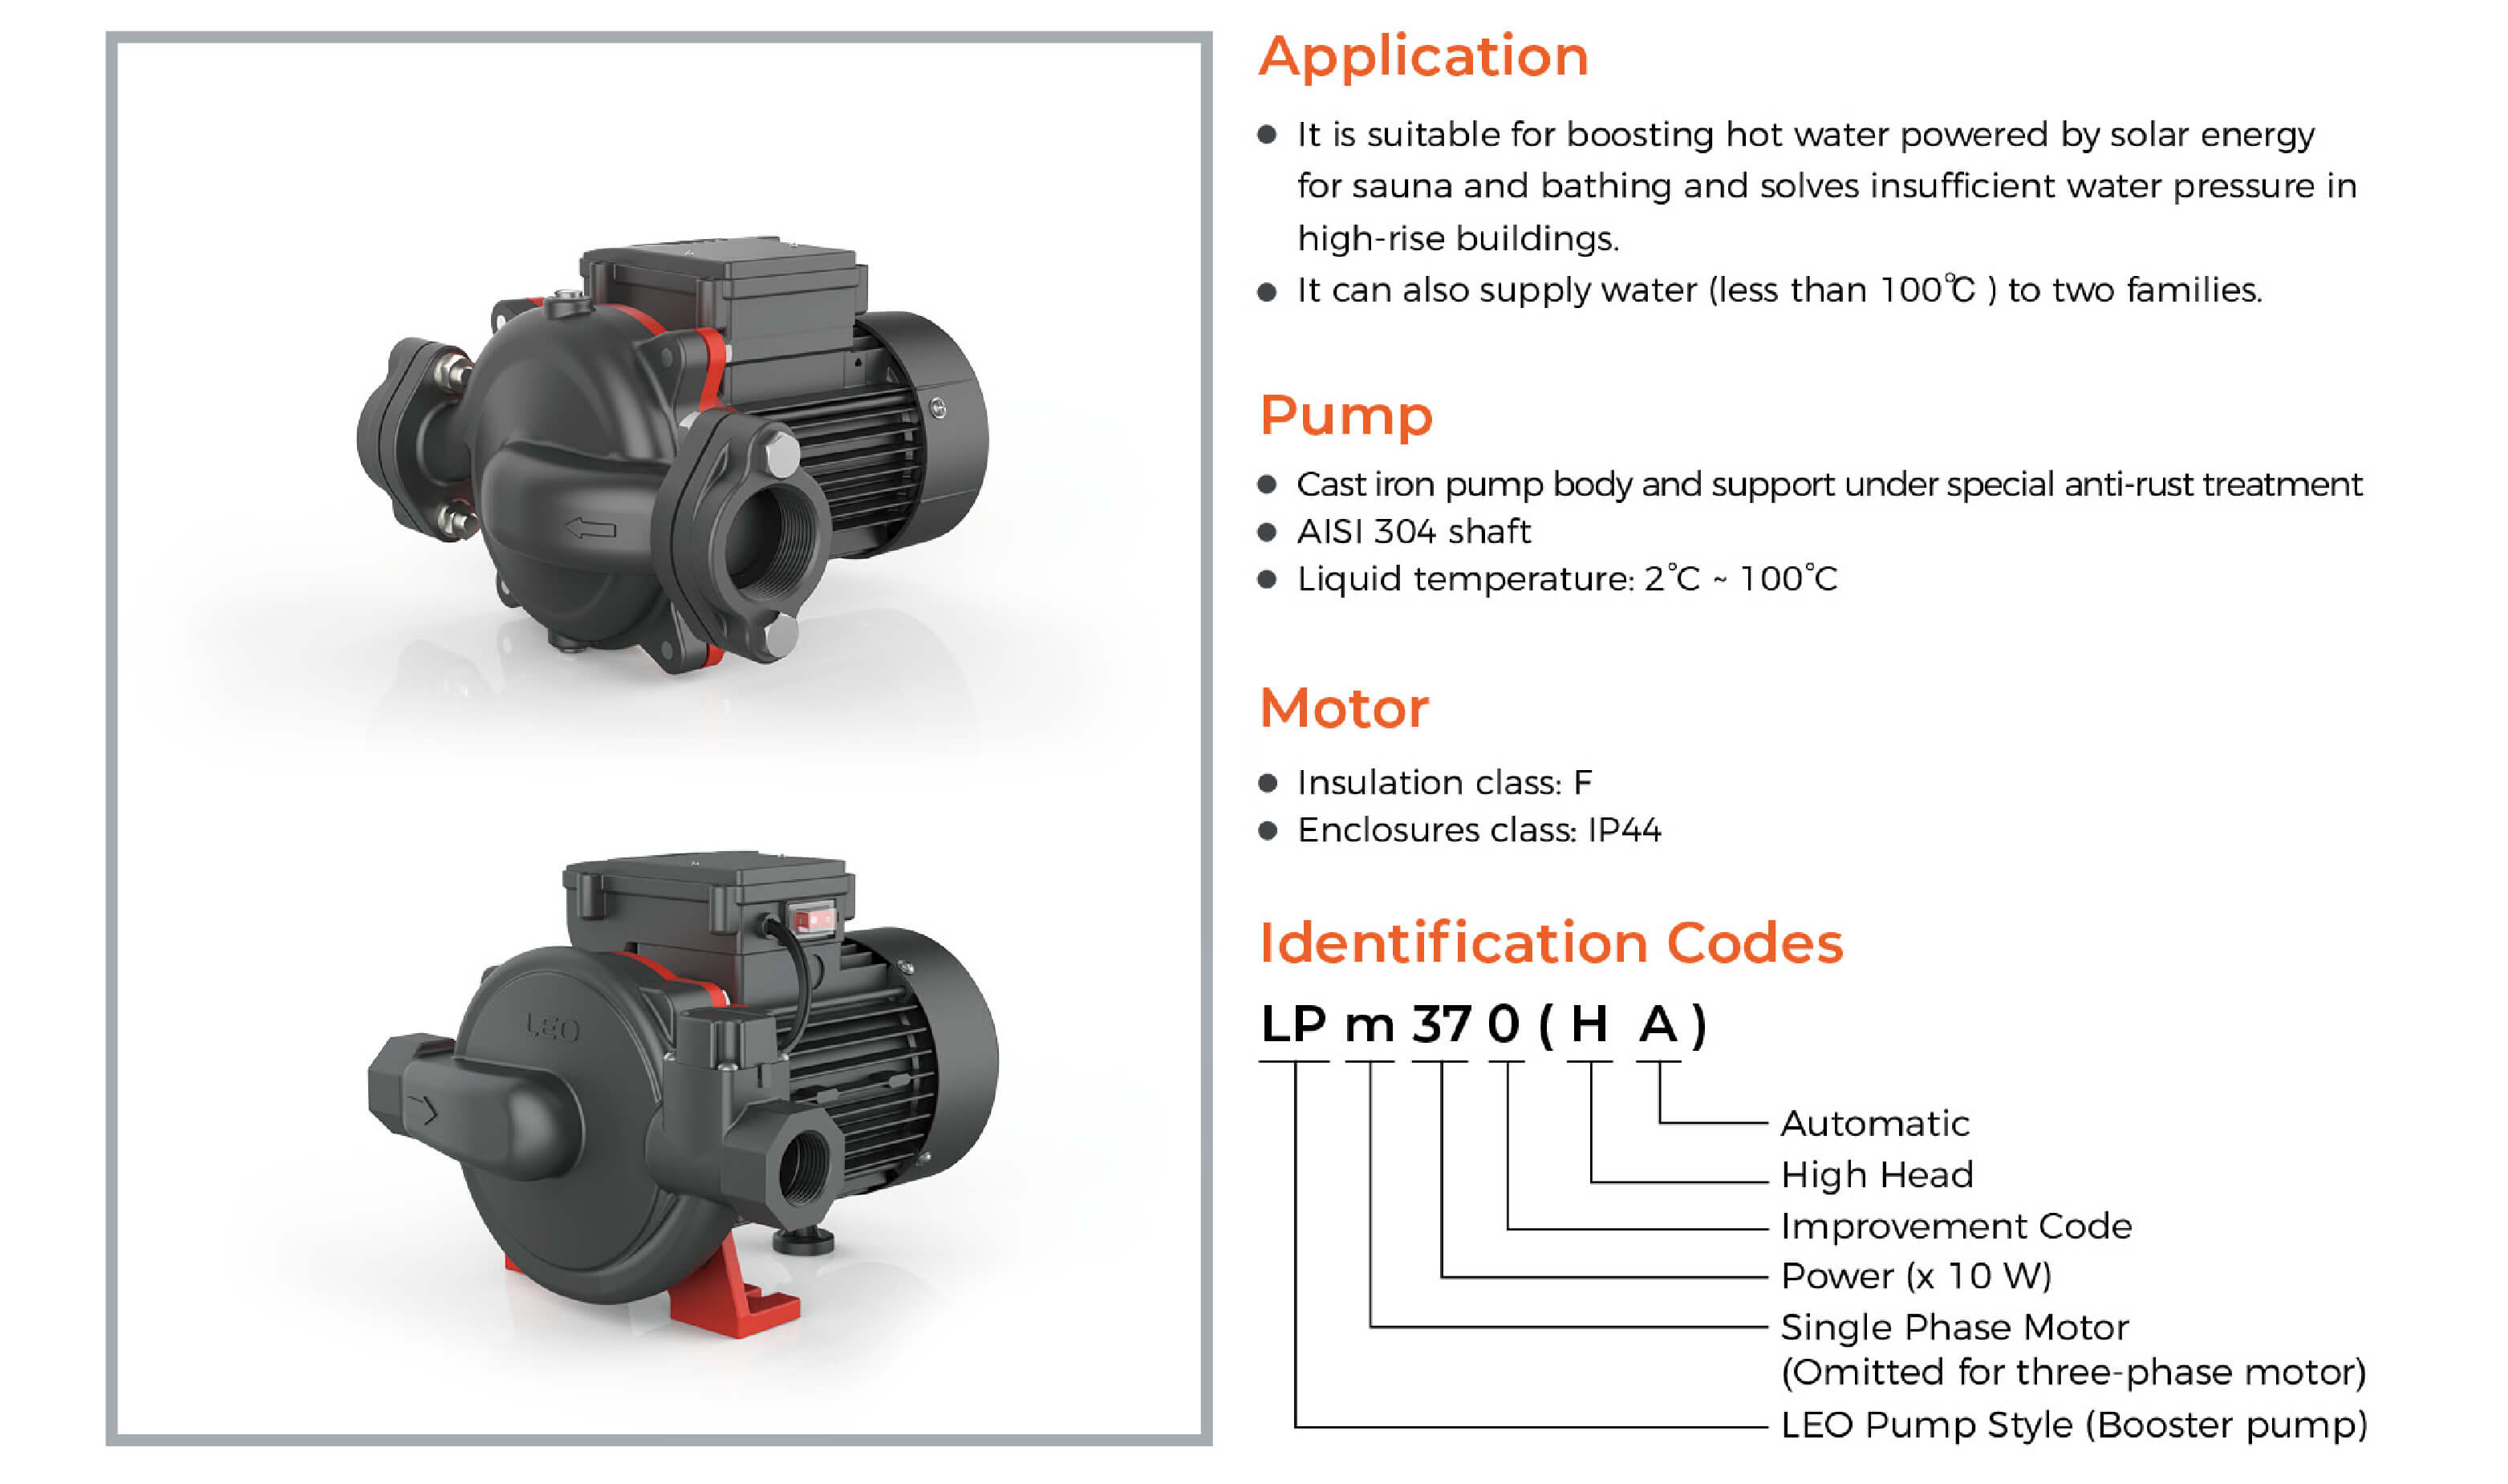 LPm Booster Pump Features